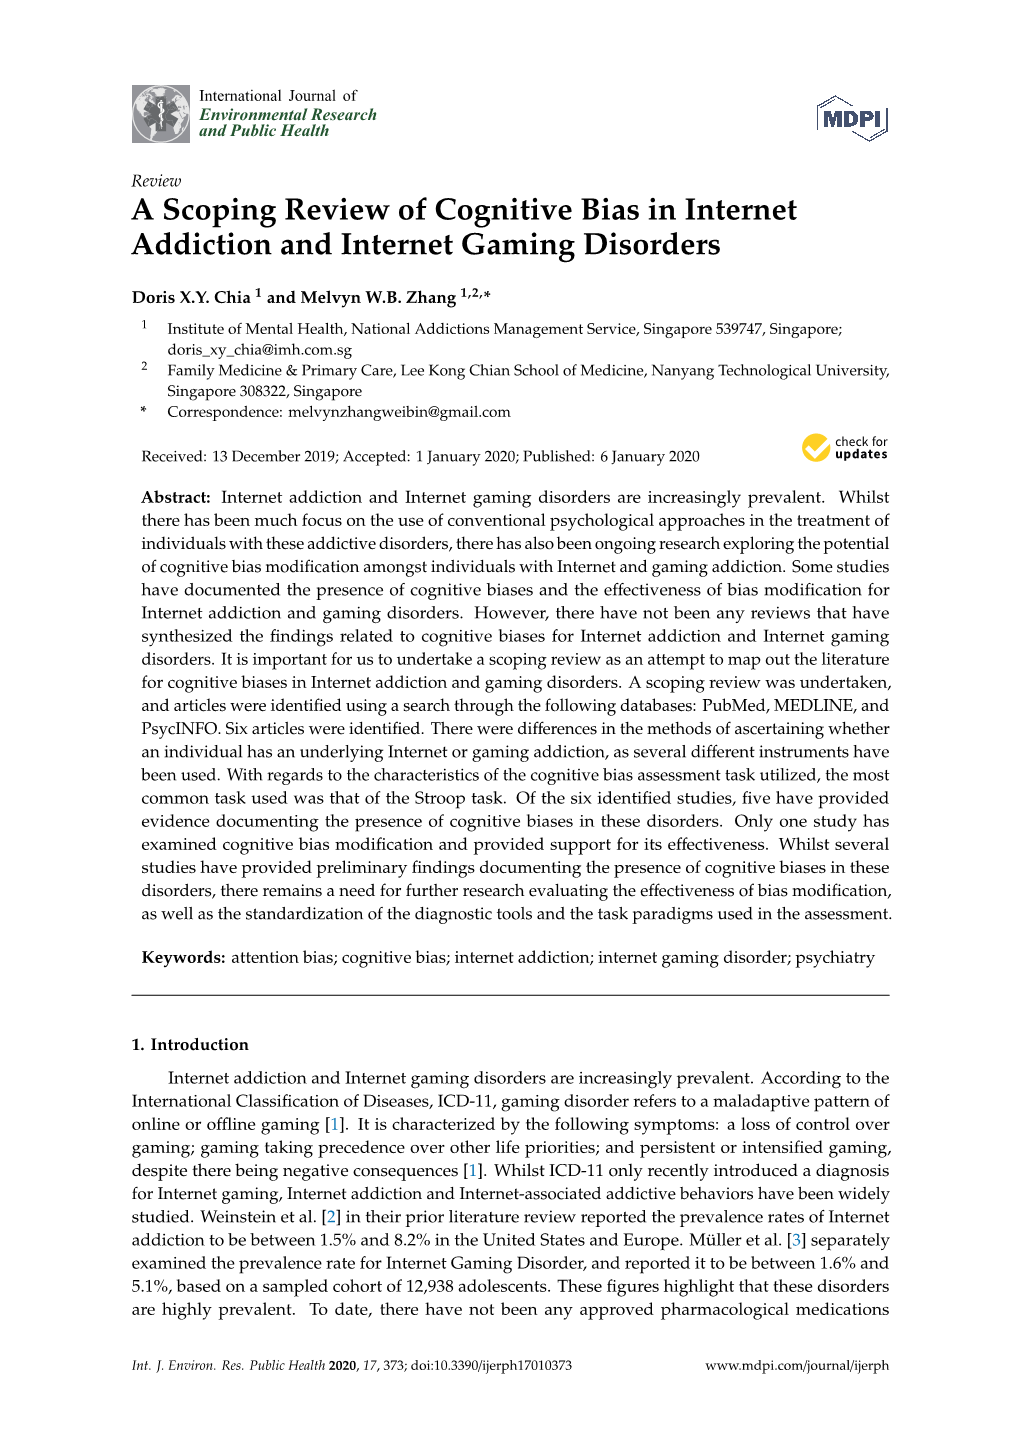 A Scoping Review of Cognitive Bias in Internet Addiction and Internet Gaming Disorders